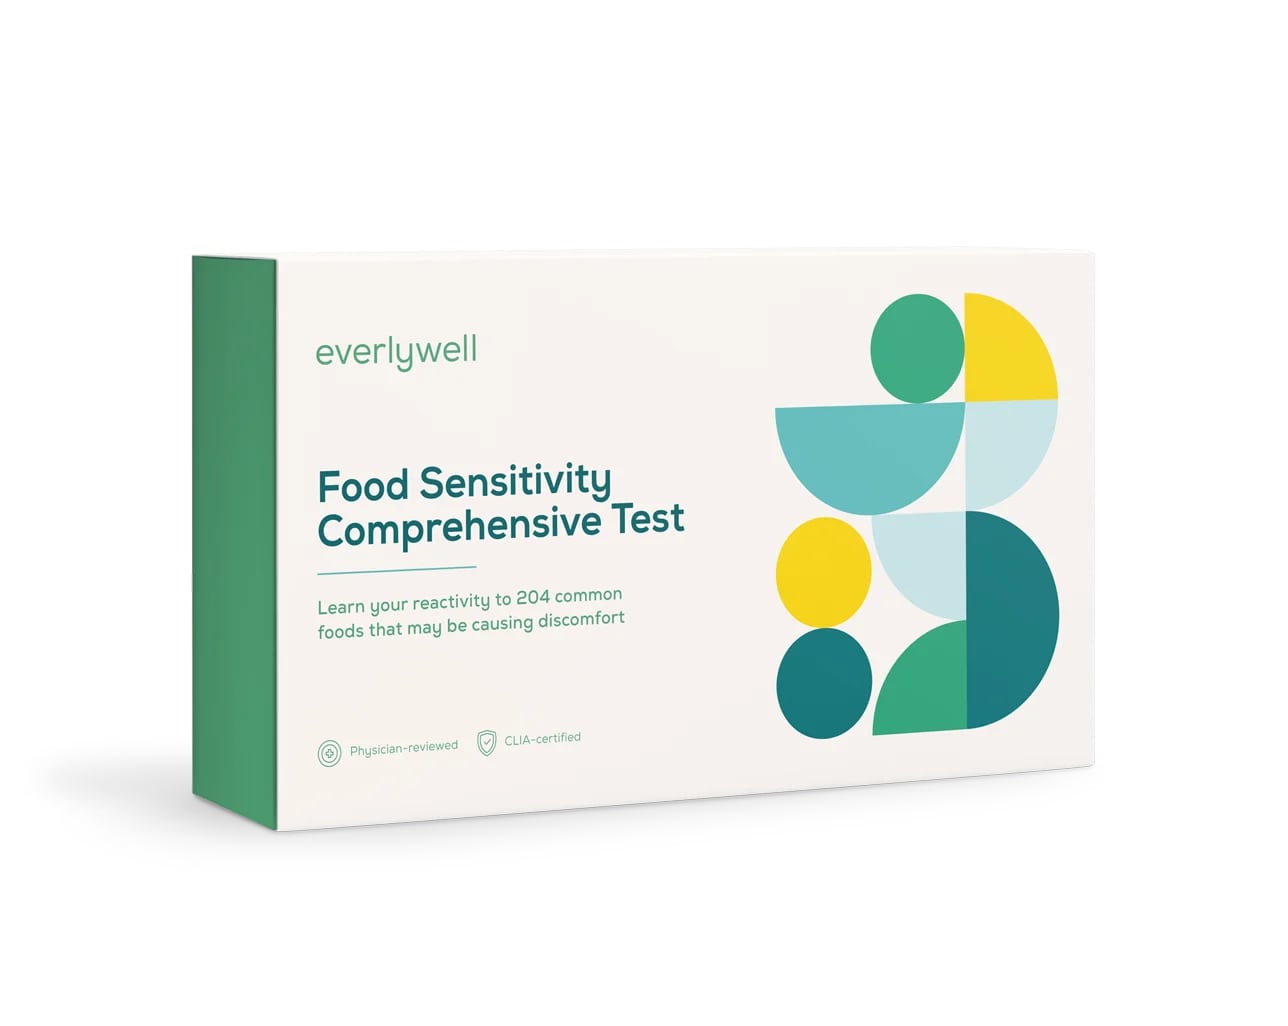 A picture of a food sensitivity testing kit from everlywell